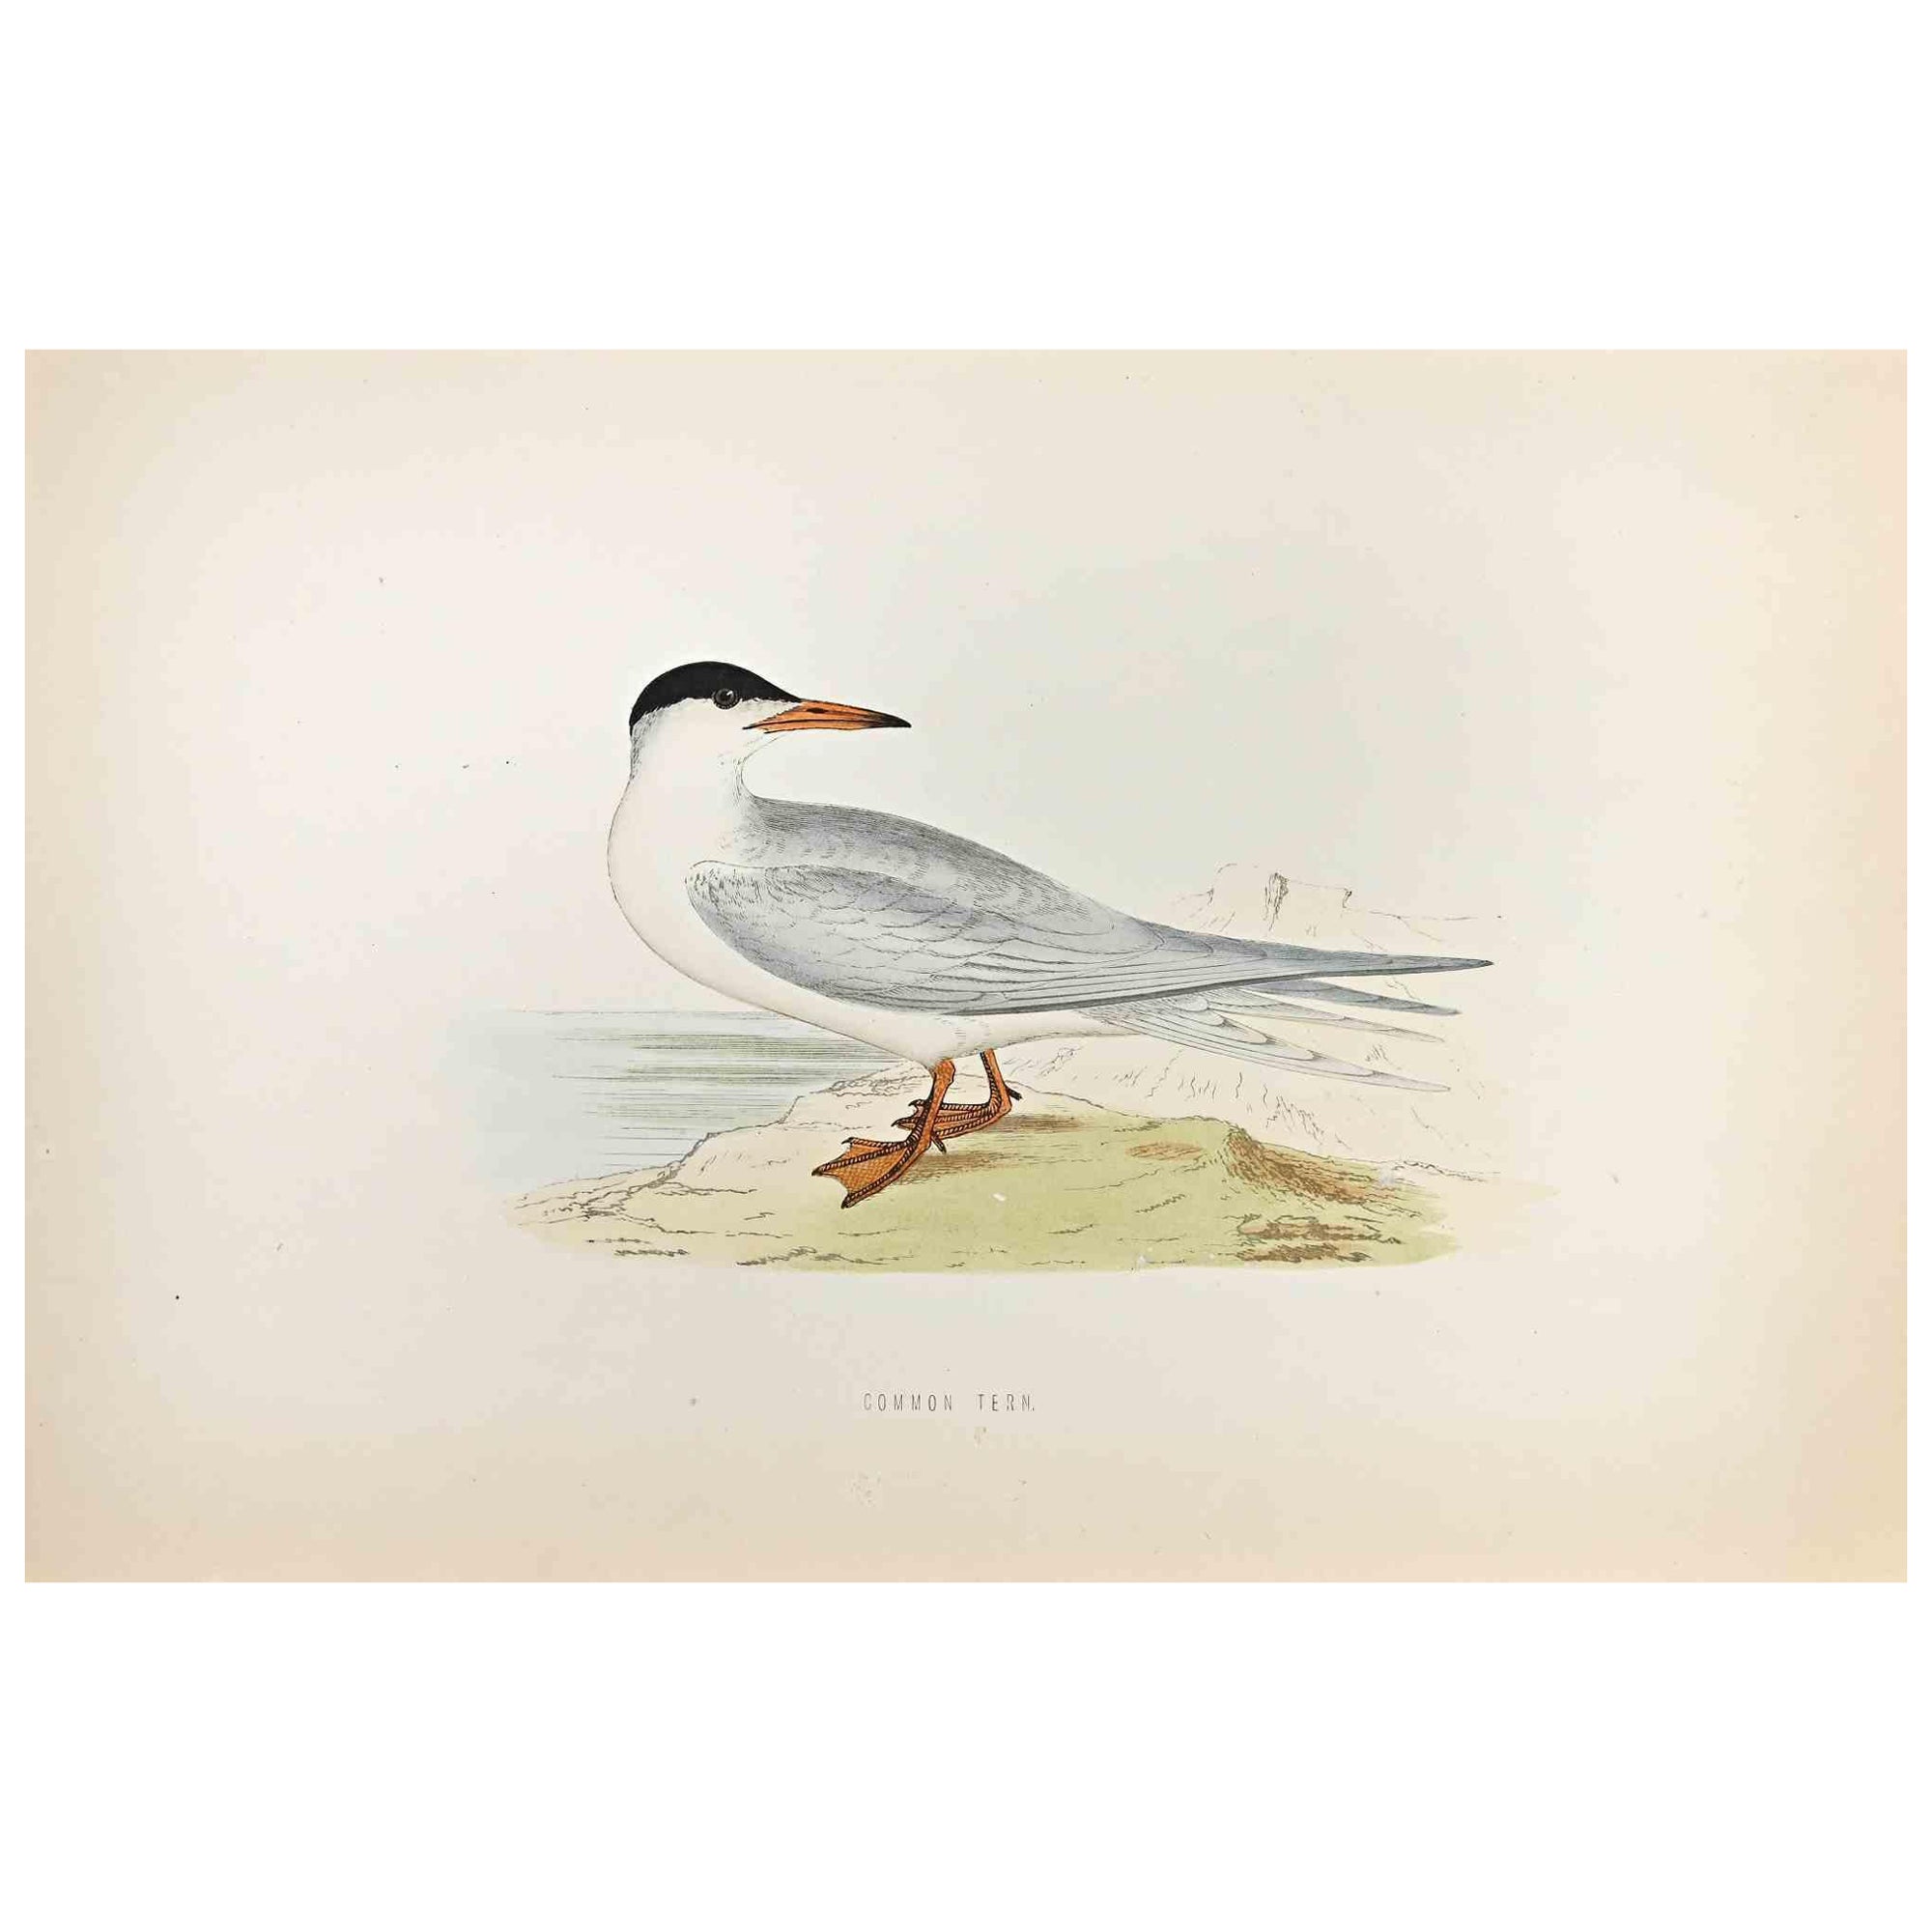 Common Tern is a modern artwork realized in 1870 by the British artist Alexander Francis Lydon (1836-1917) . 

Woodcut print, hand colored, published by London, Bell & Sons, 1870.  Name of the bird printed in plate. This work is part of a print